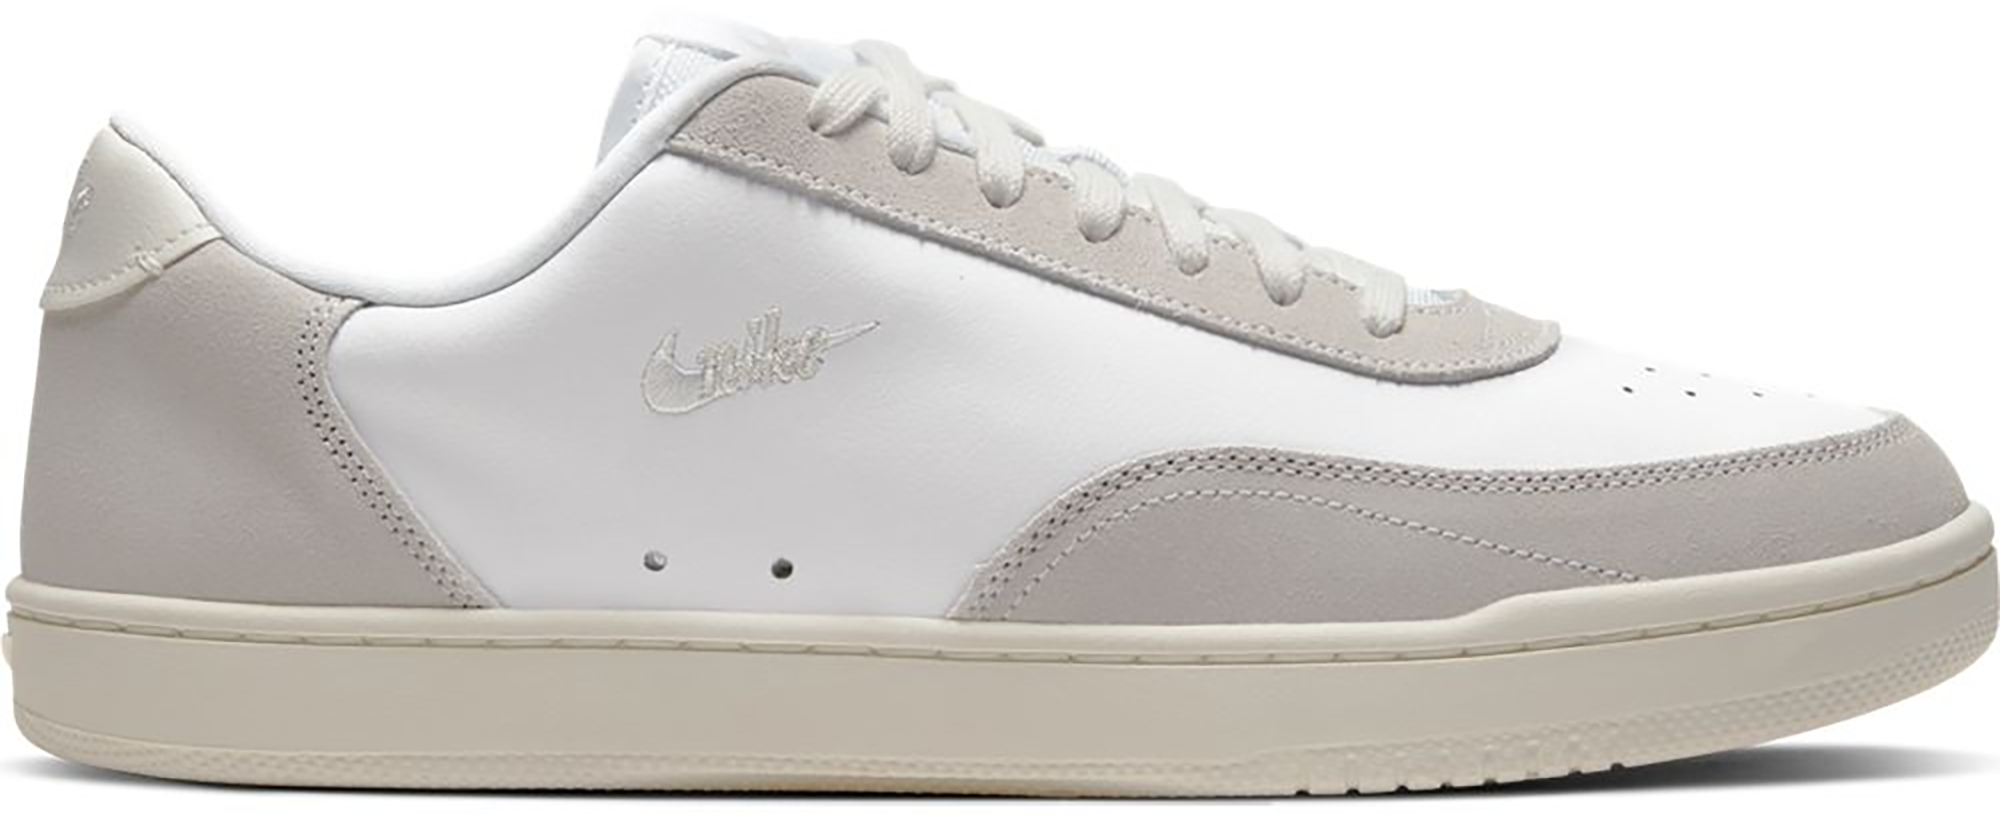 nike court vintage trainers in cream